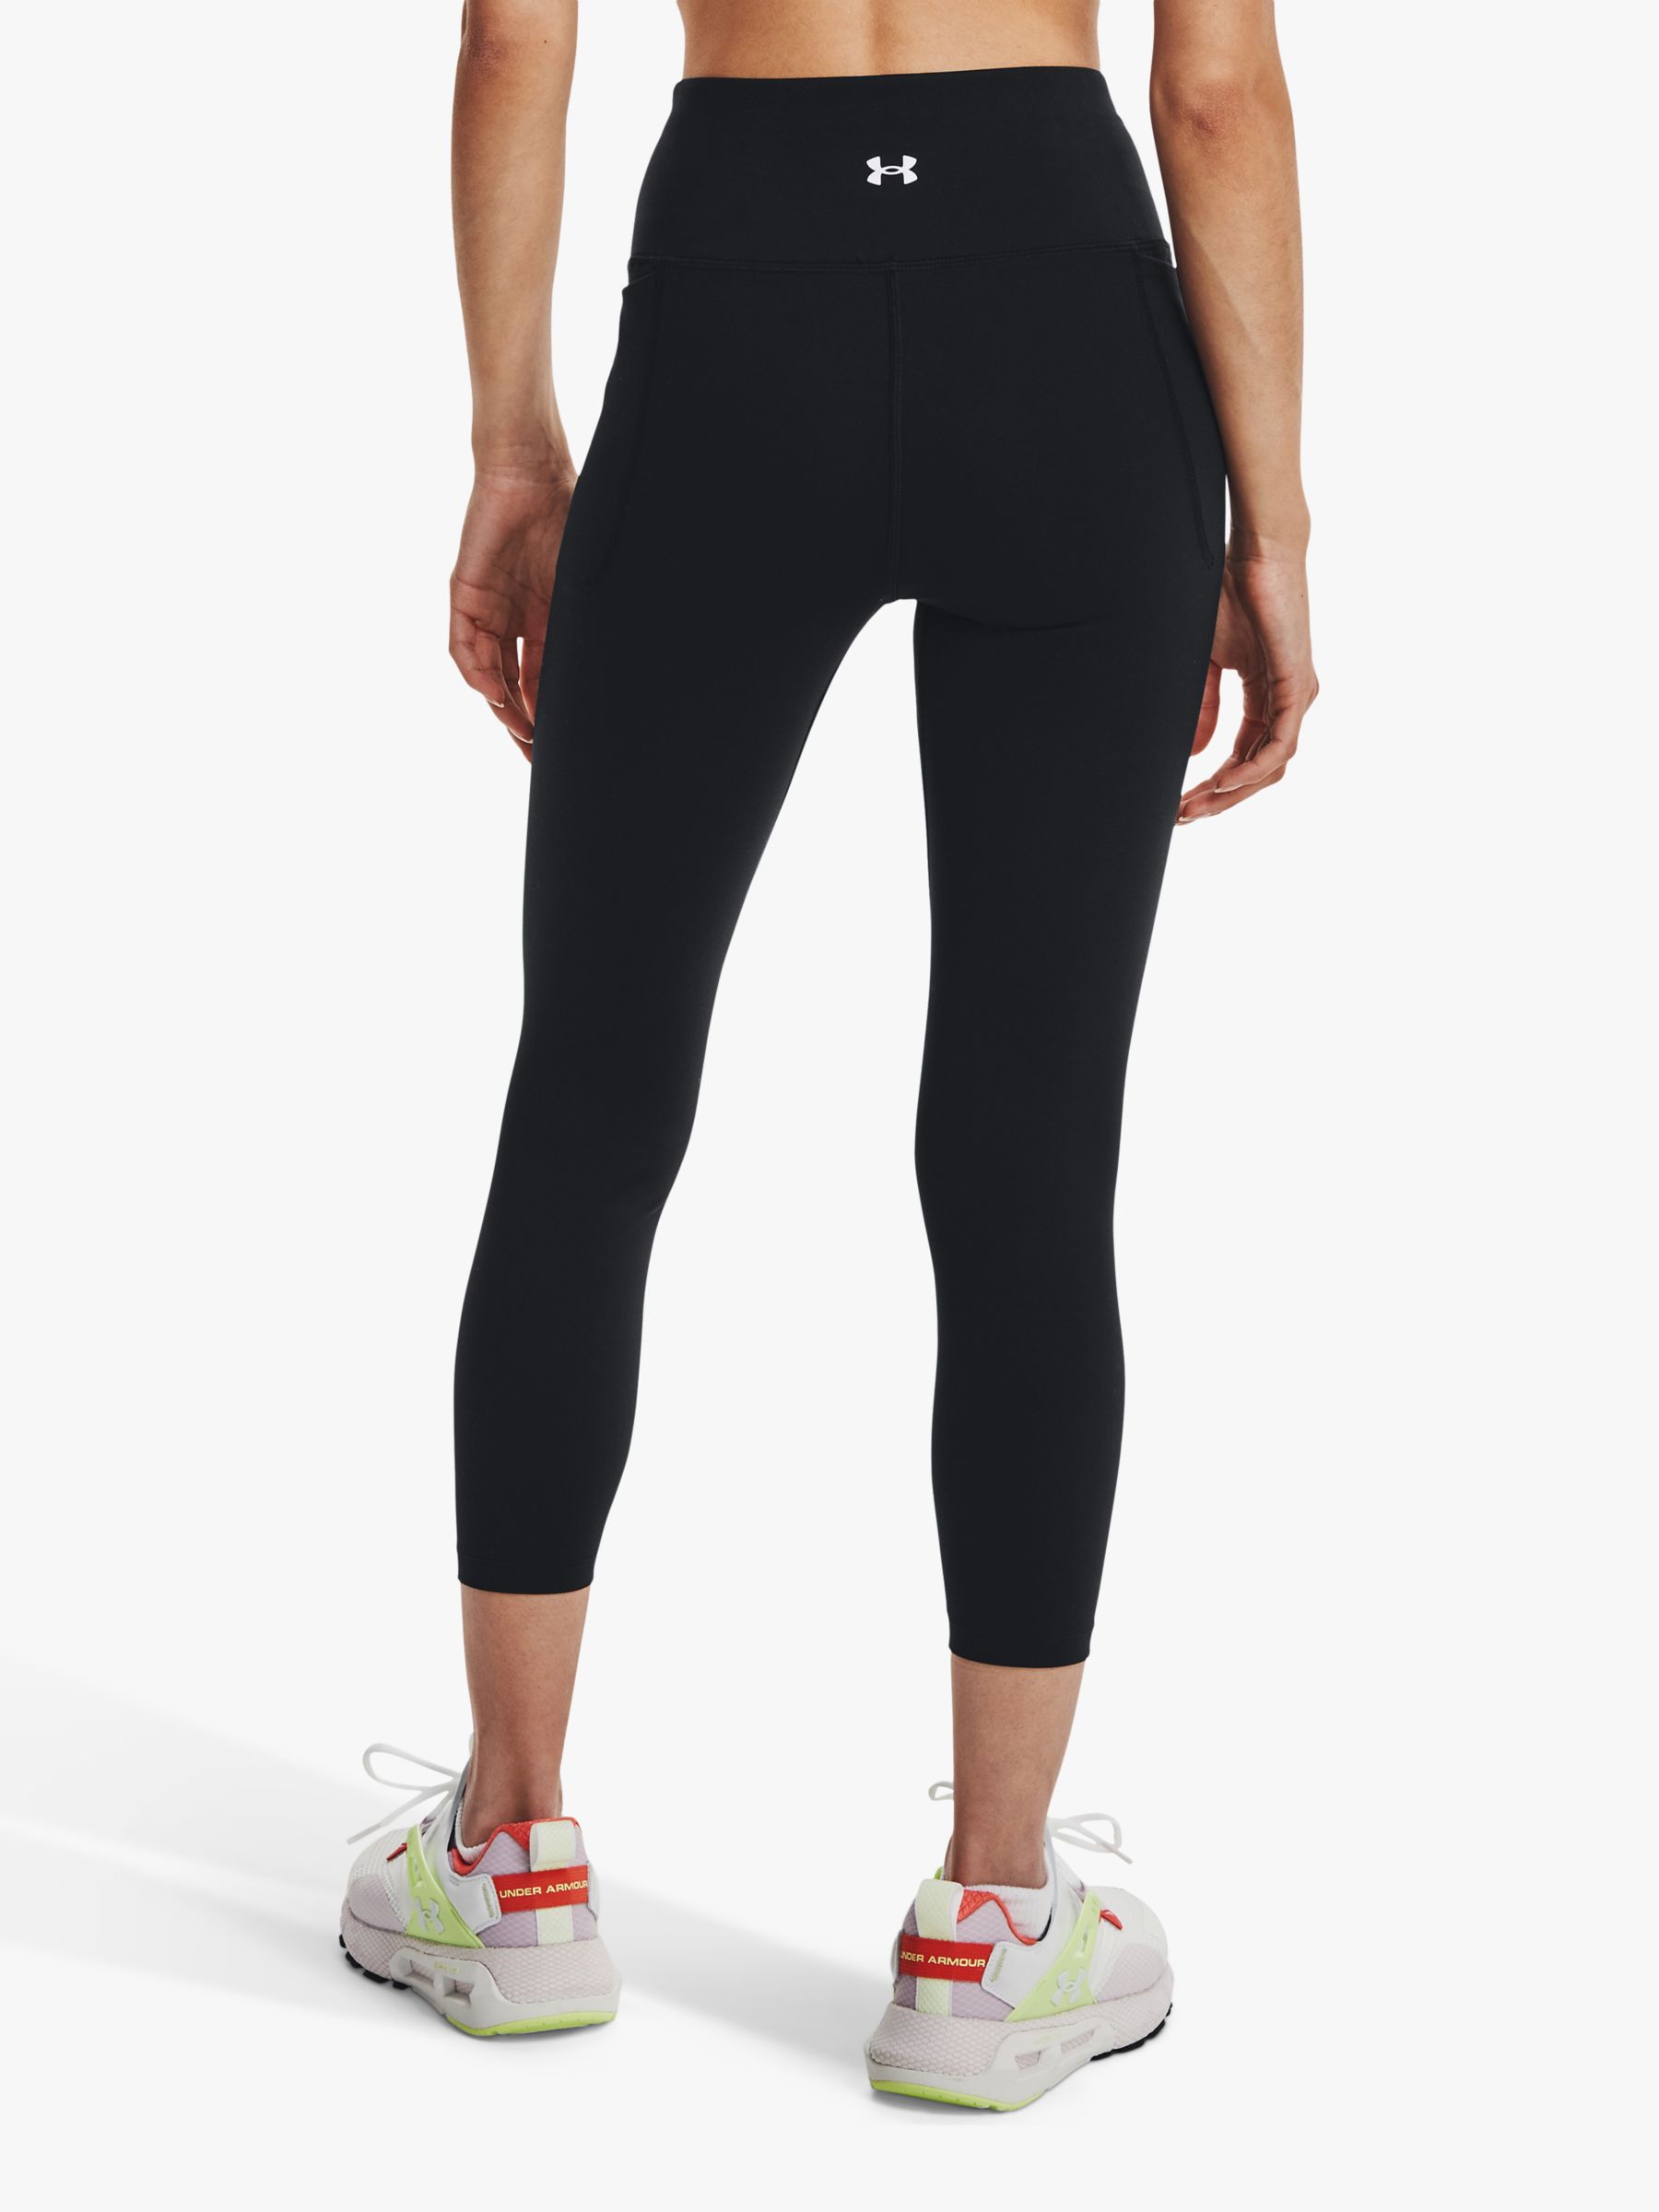 Under Armour Women's Plus Meridian Ankle Tights